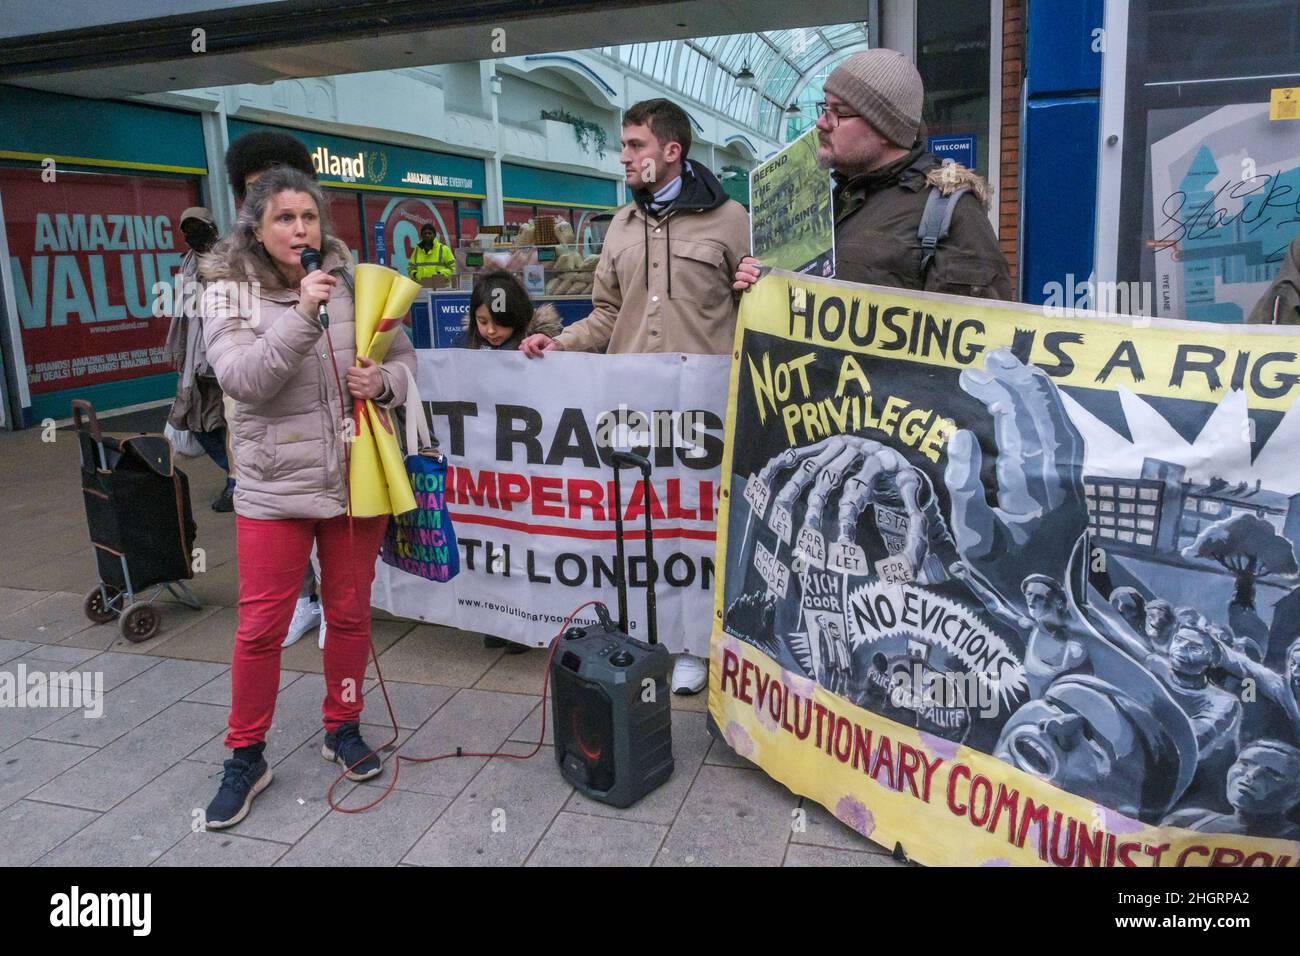 London, UK. 22nd Dec 2022. A woman from the Central Hill Estate in Lambeth speaks about their fight to stop estate demolition. Housing activists protest in front of the Aylesham Shopping Centre, Peckham calling for safe, decent and secure housing at reasonable rents for all. Southwark's Labour Council has demolished thousands of council homes, selling off land and homes for development almost entirely for private rent or sale, with little at social rents despite over 16,000 families on the council waiting list and 3,300 in temporary accommodation. Peter Marshall/Alamy Live News Stock Photo